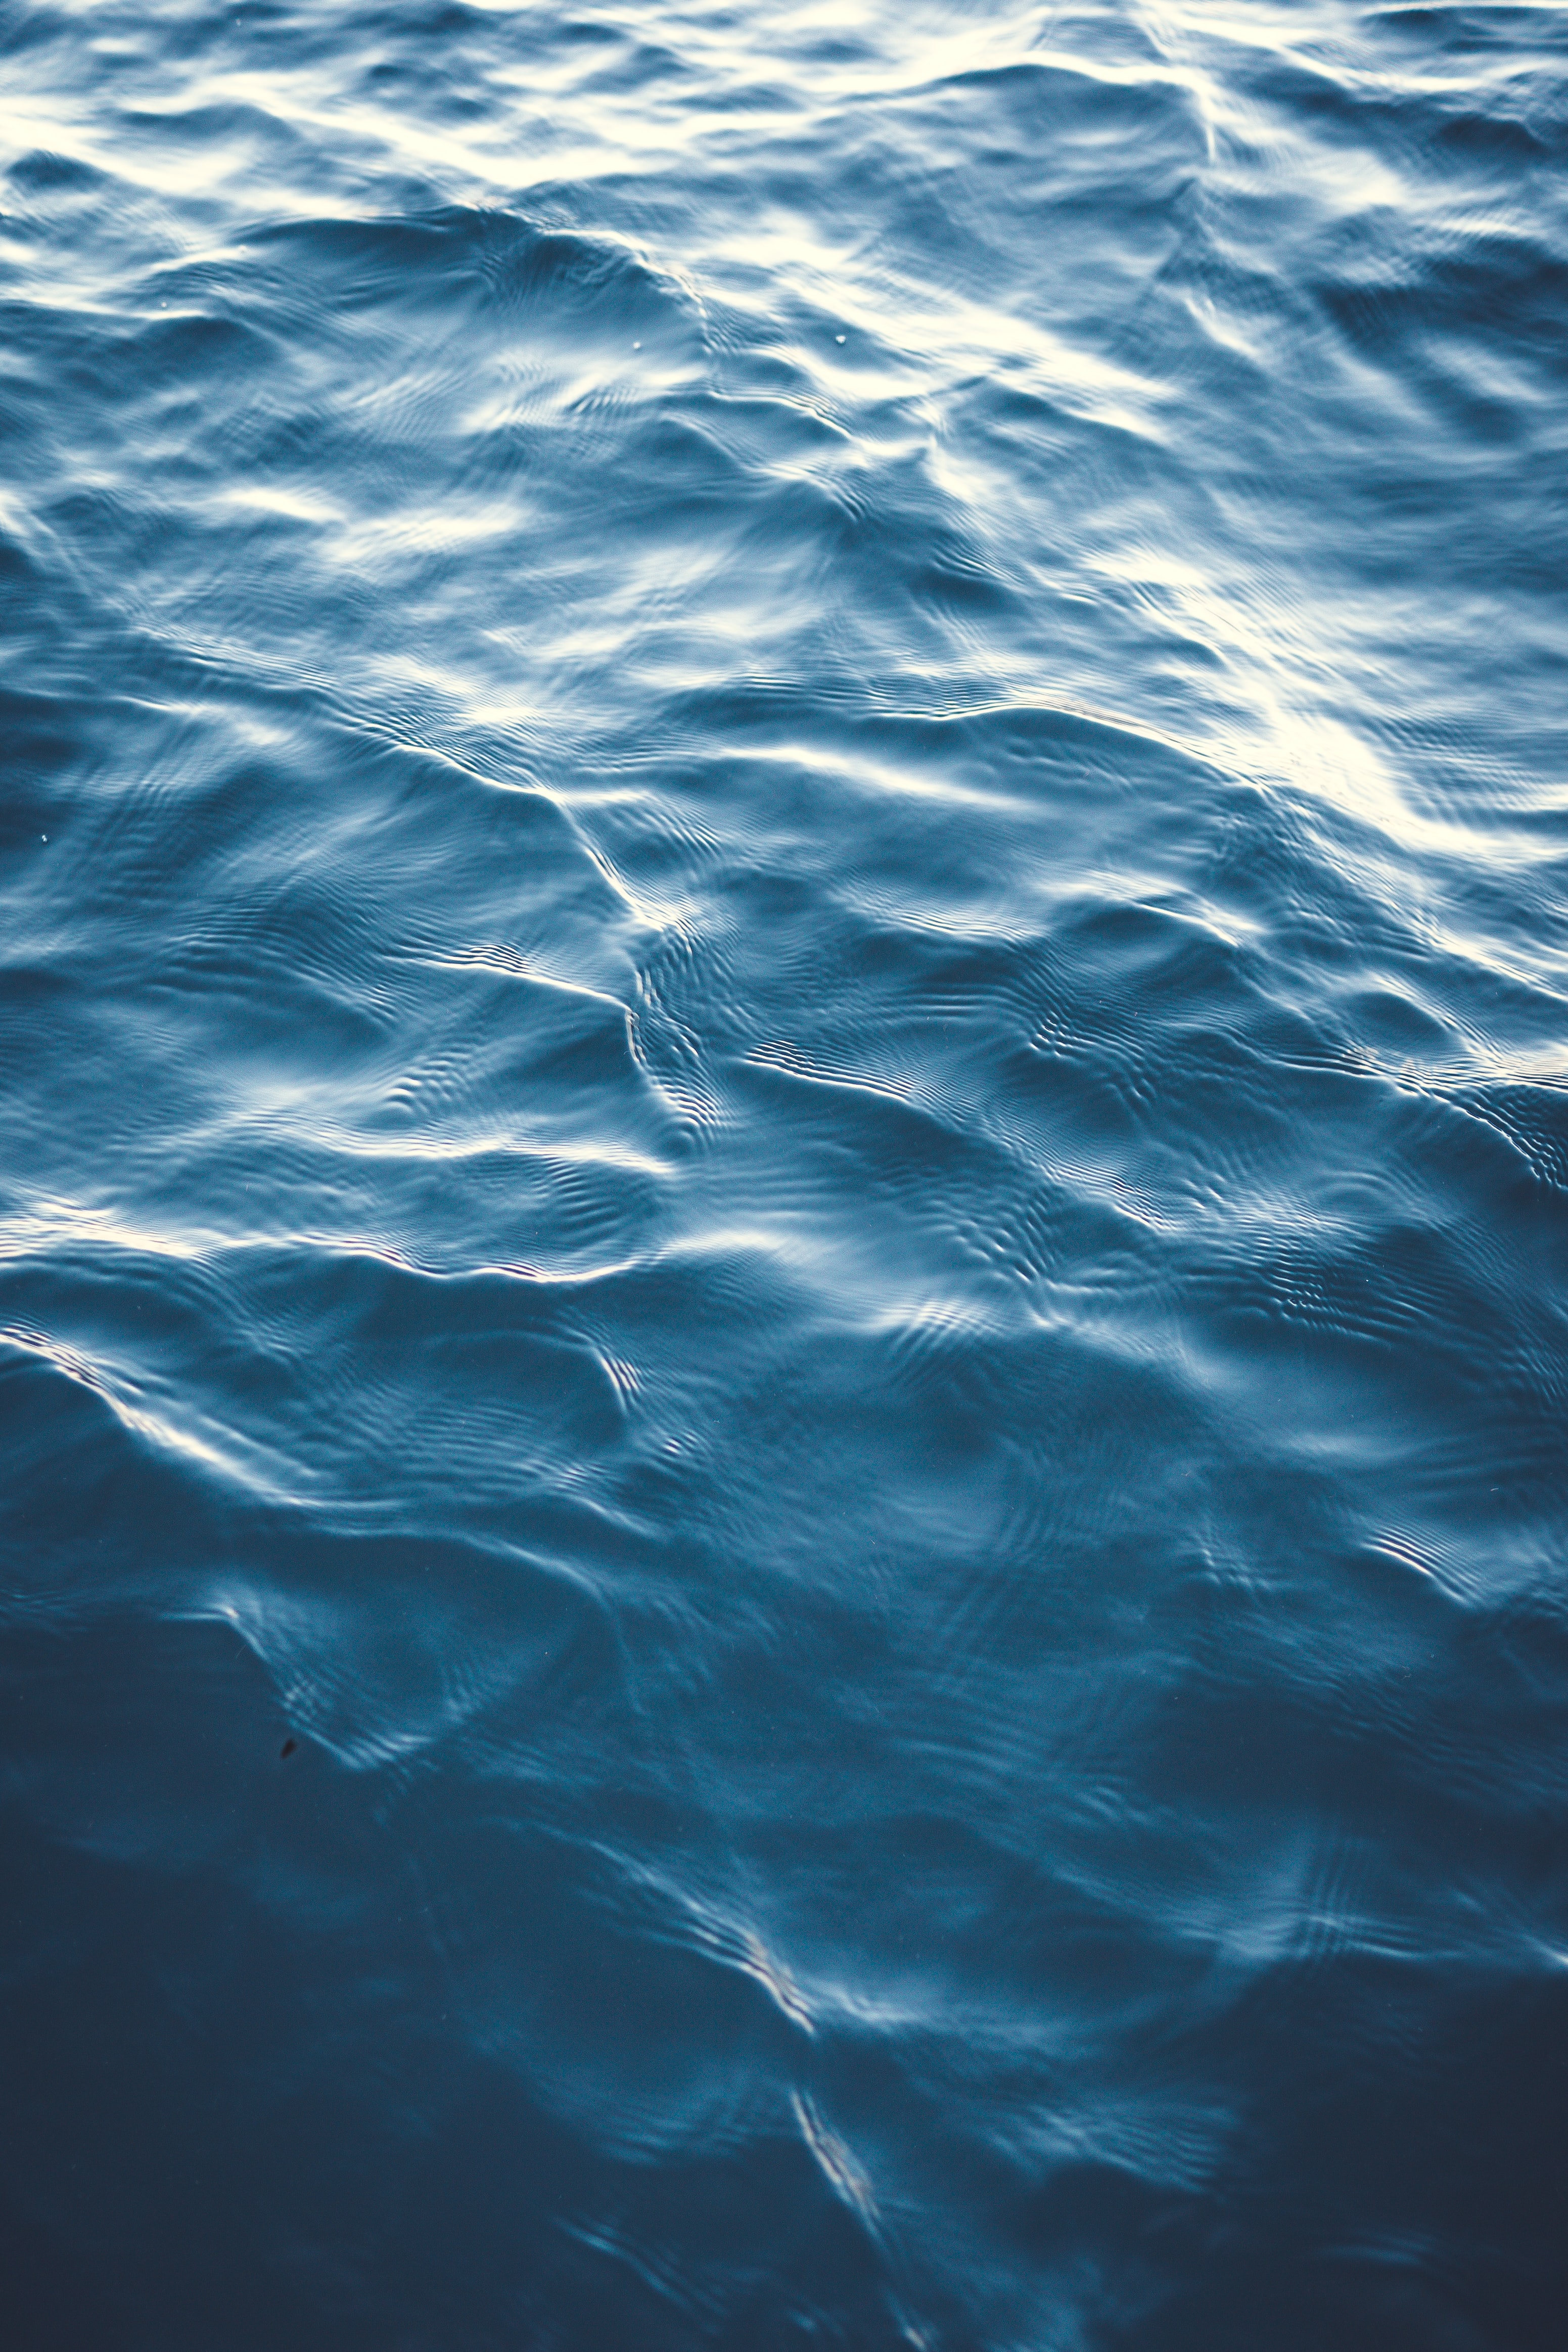 Free HD textures, texture, ripples, water, waves, ripple, wavy, distortion